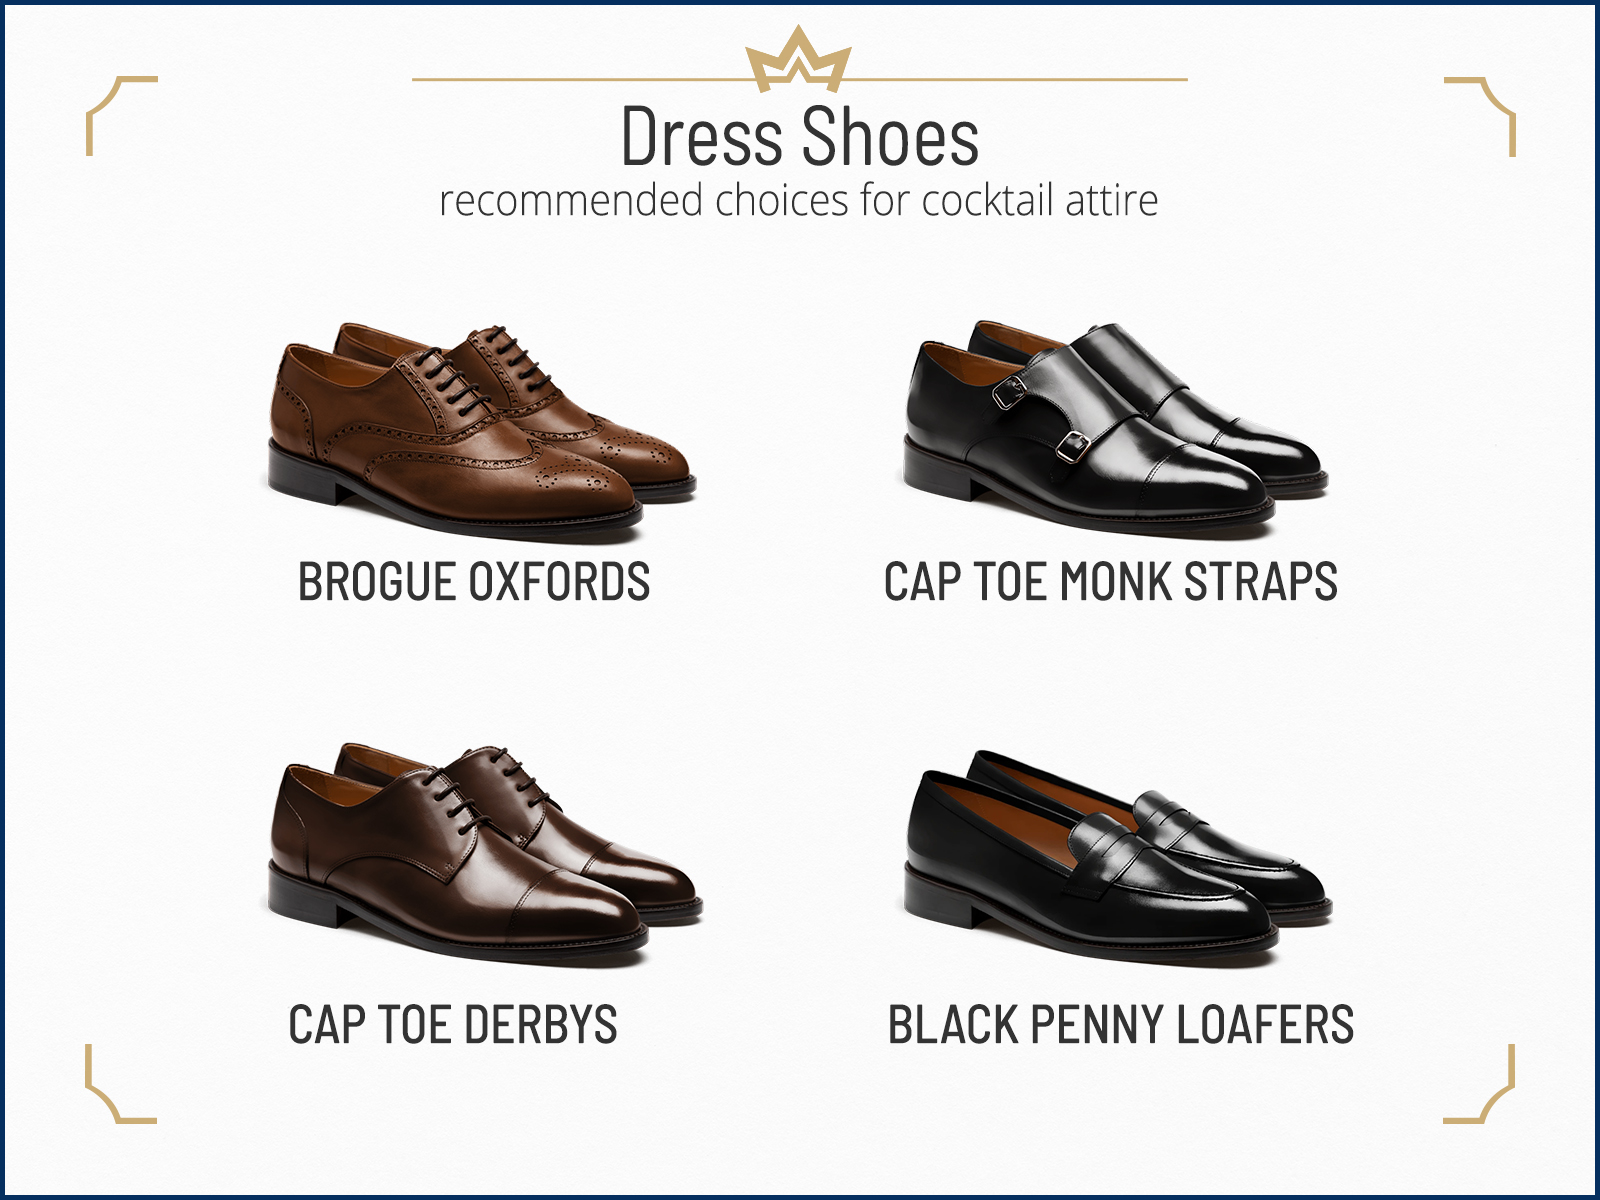 Recommended dress shoes for cocktail attire